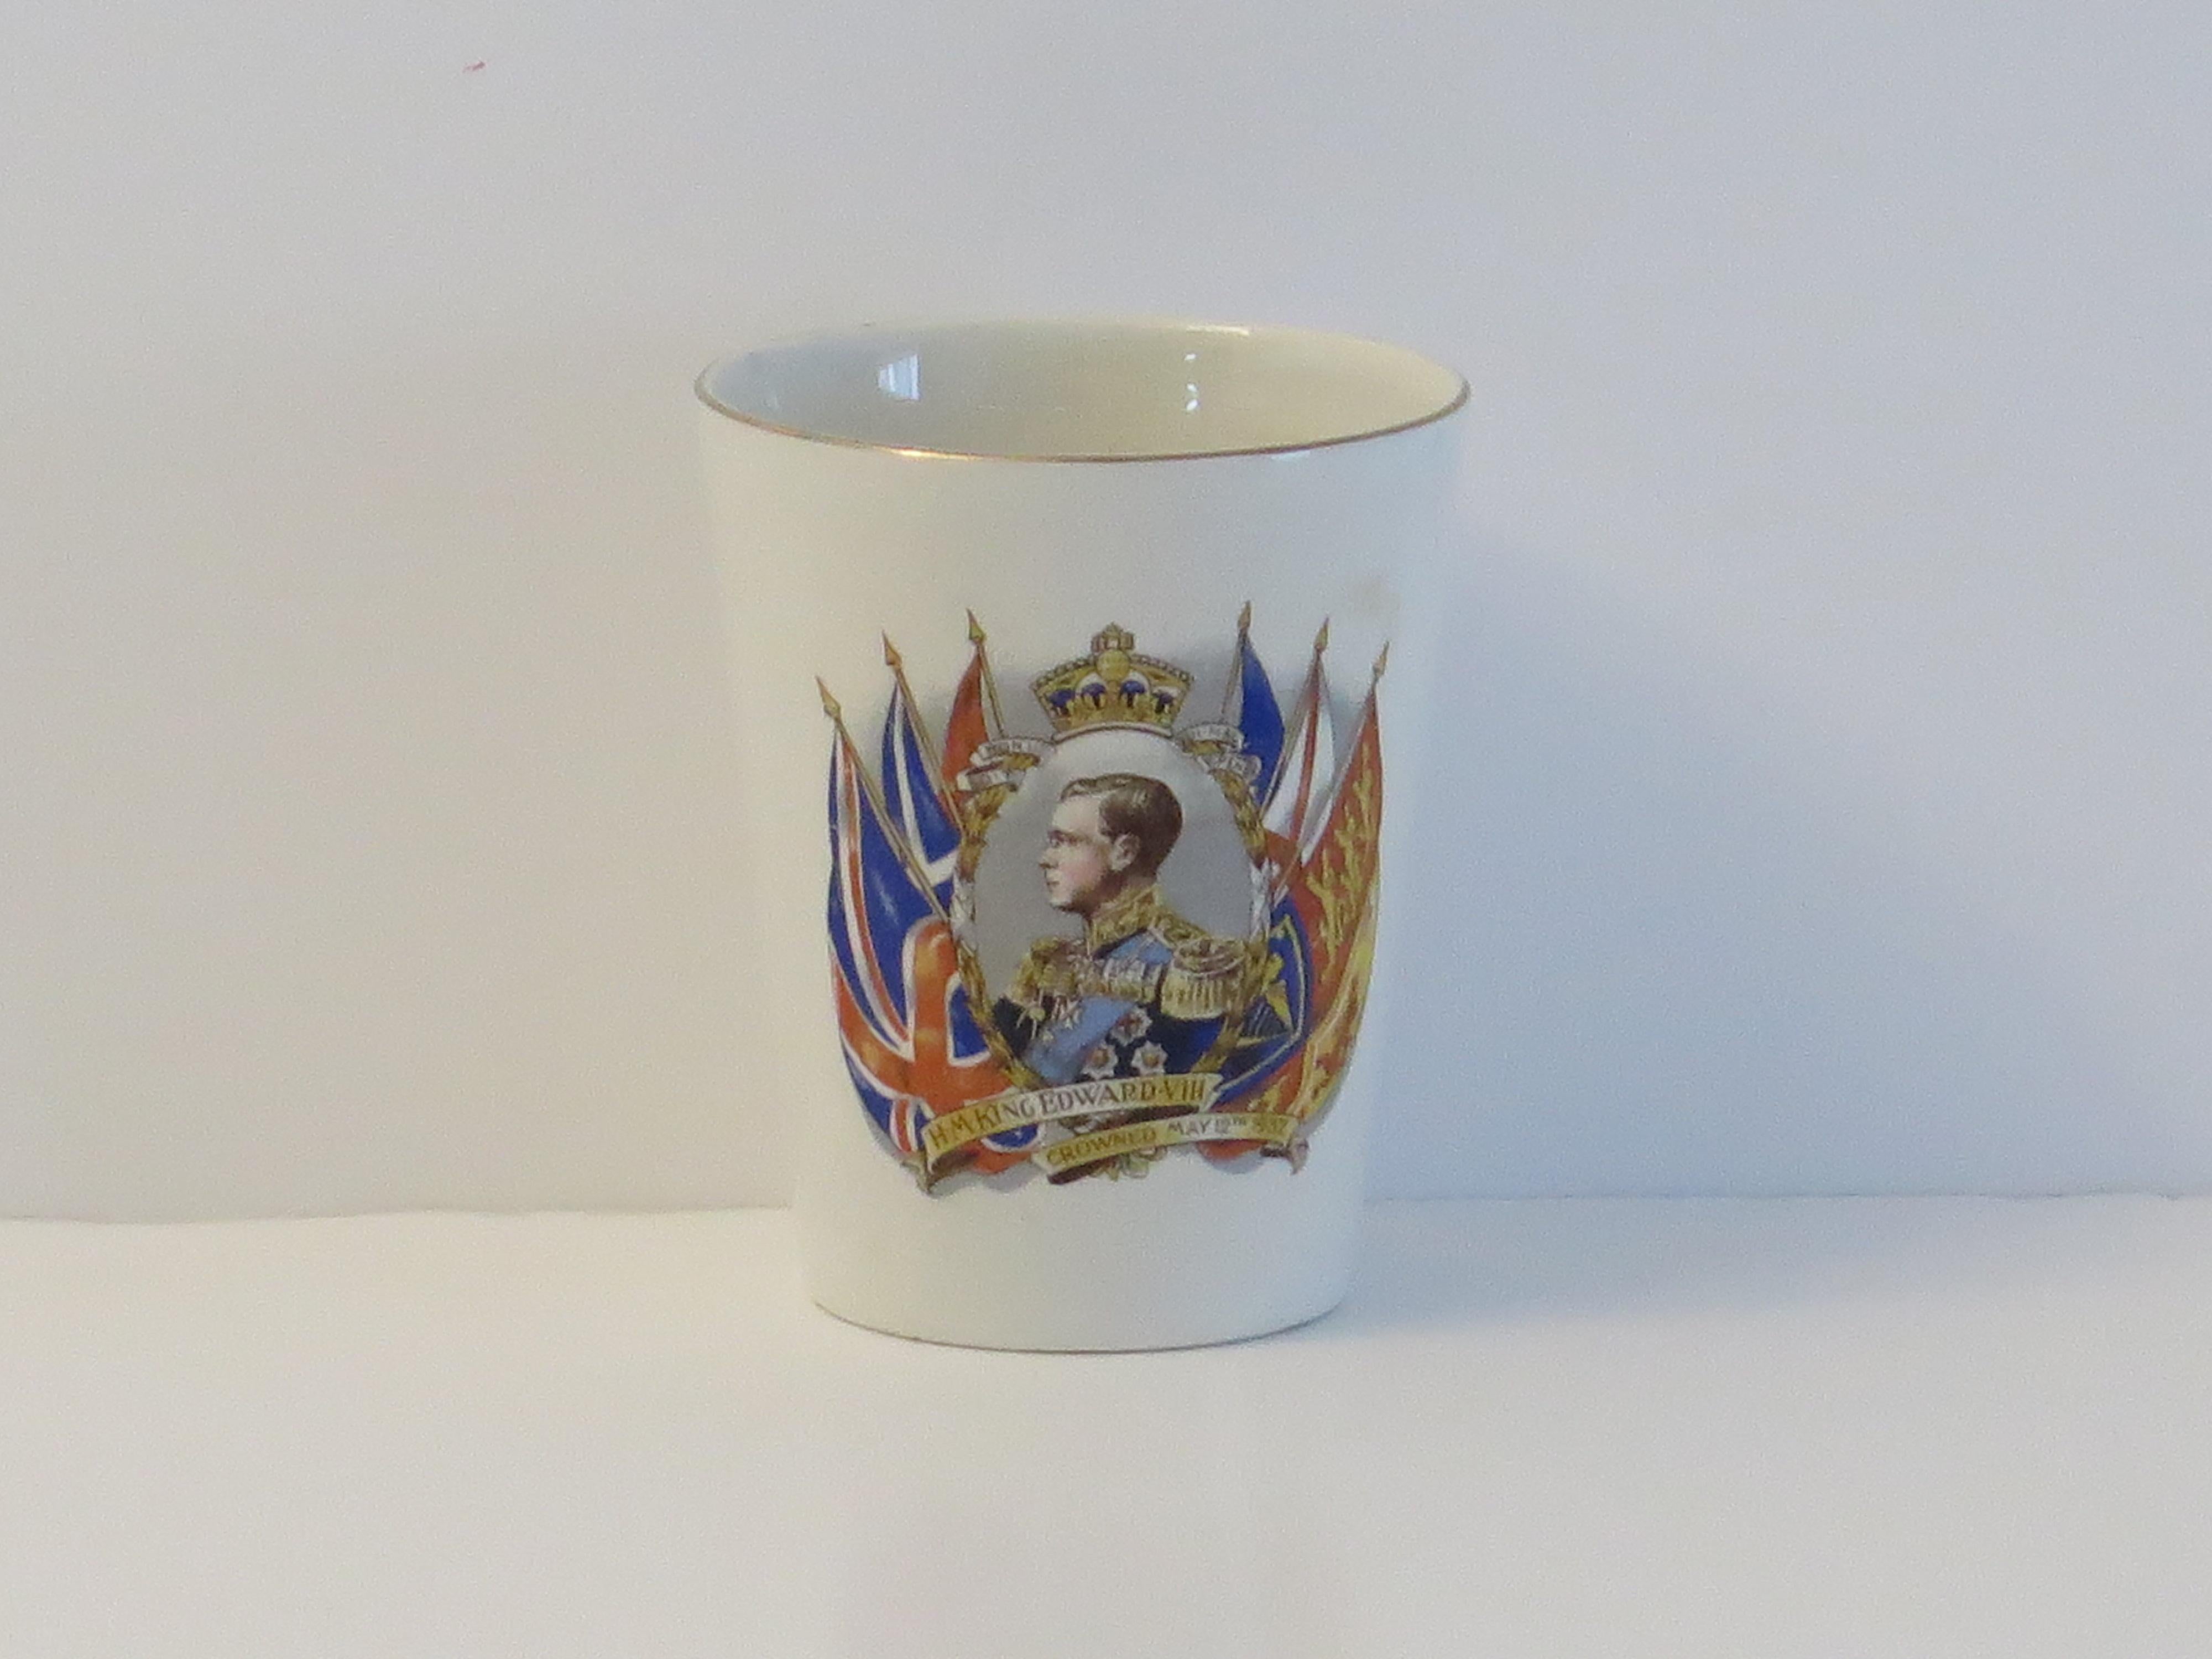 King Edward V111  Royal Commemorative Pottery Beaker, May 12th 1937 In Good Condition For Sale In Lincoln, Lincolnshire